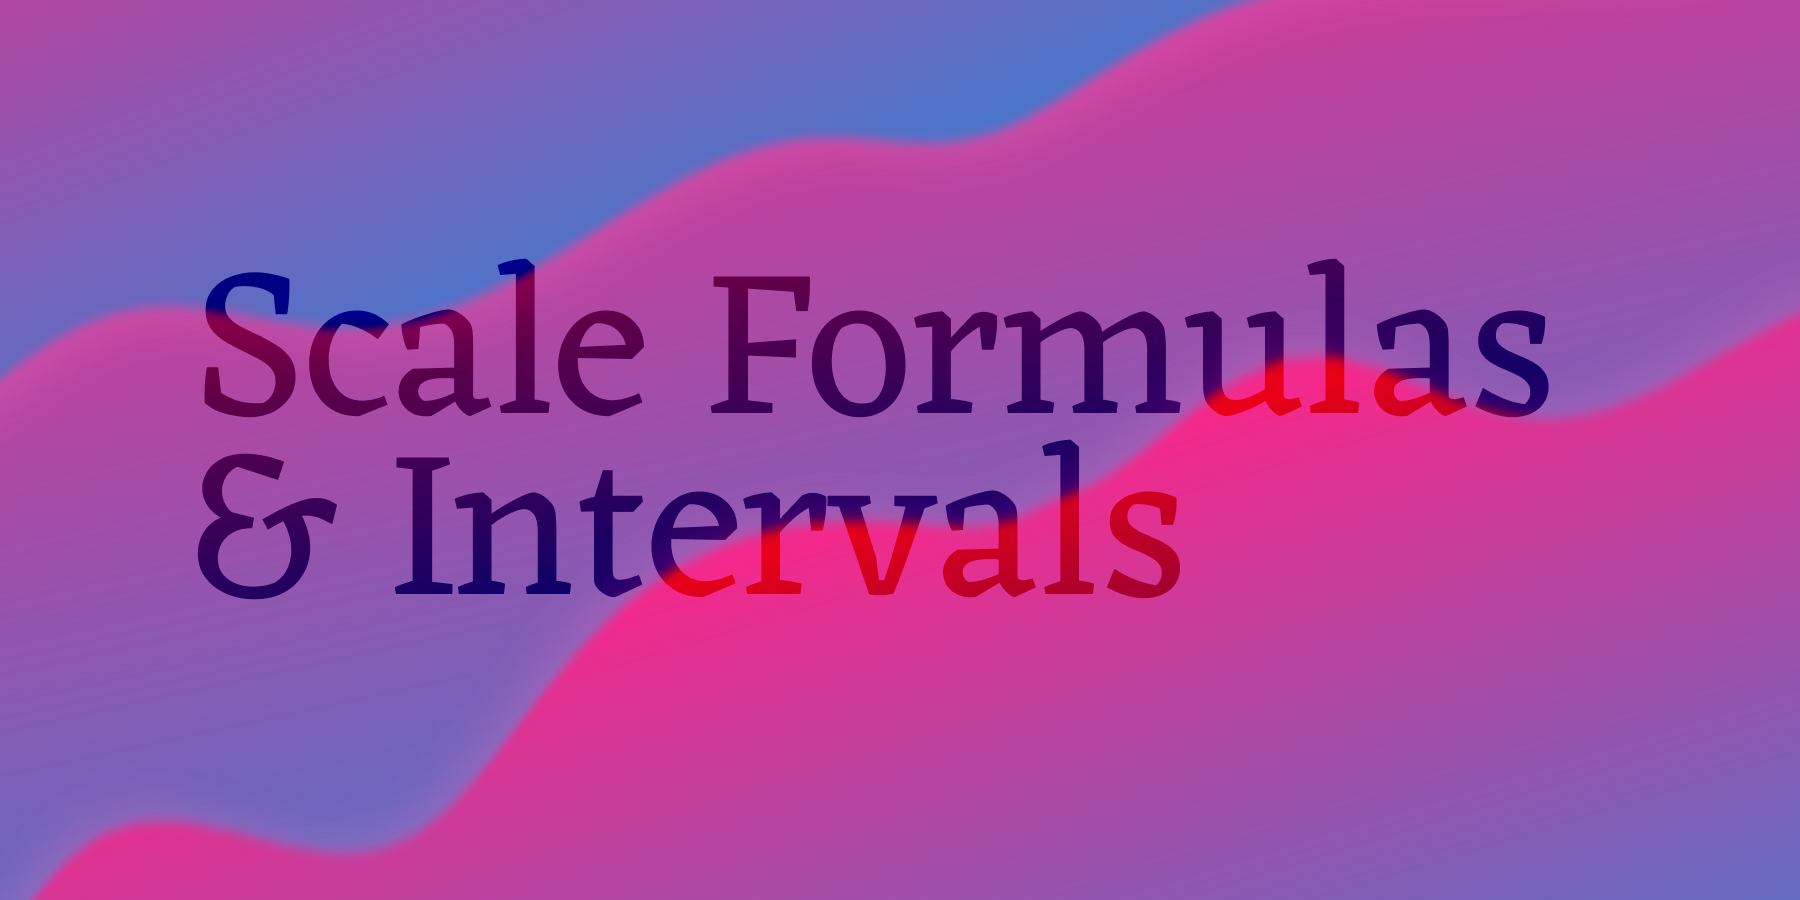 Scale Formulas, Patterns & Intervals Chart for Quick Reference | muted.io